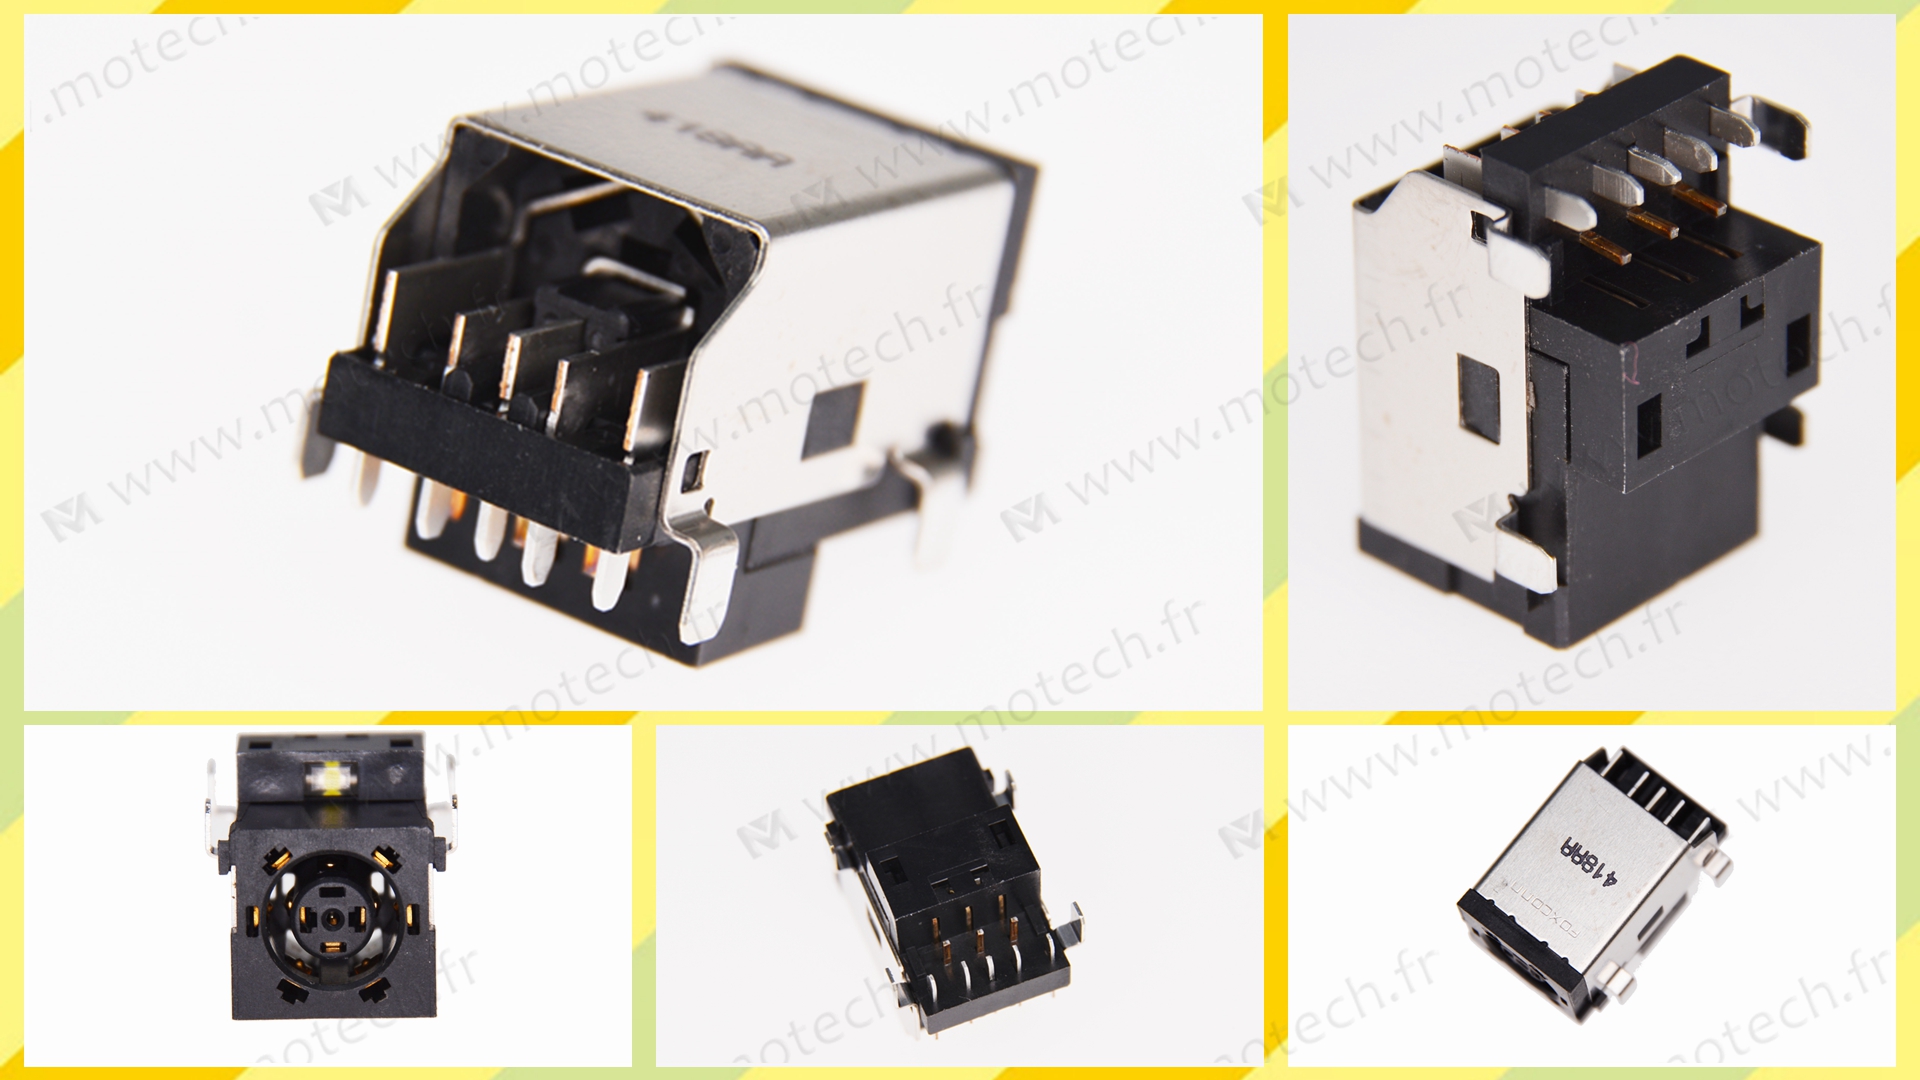 Dell 1736 charging connector, Dell 1736 DC Power Jack, Dell 1736 Power Jack, Dell 1736 plug, Dell 1736 Jack socket, Dell 1736 connecteur de charge, 